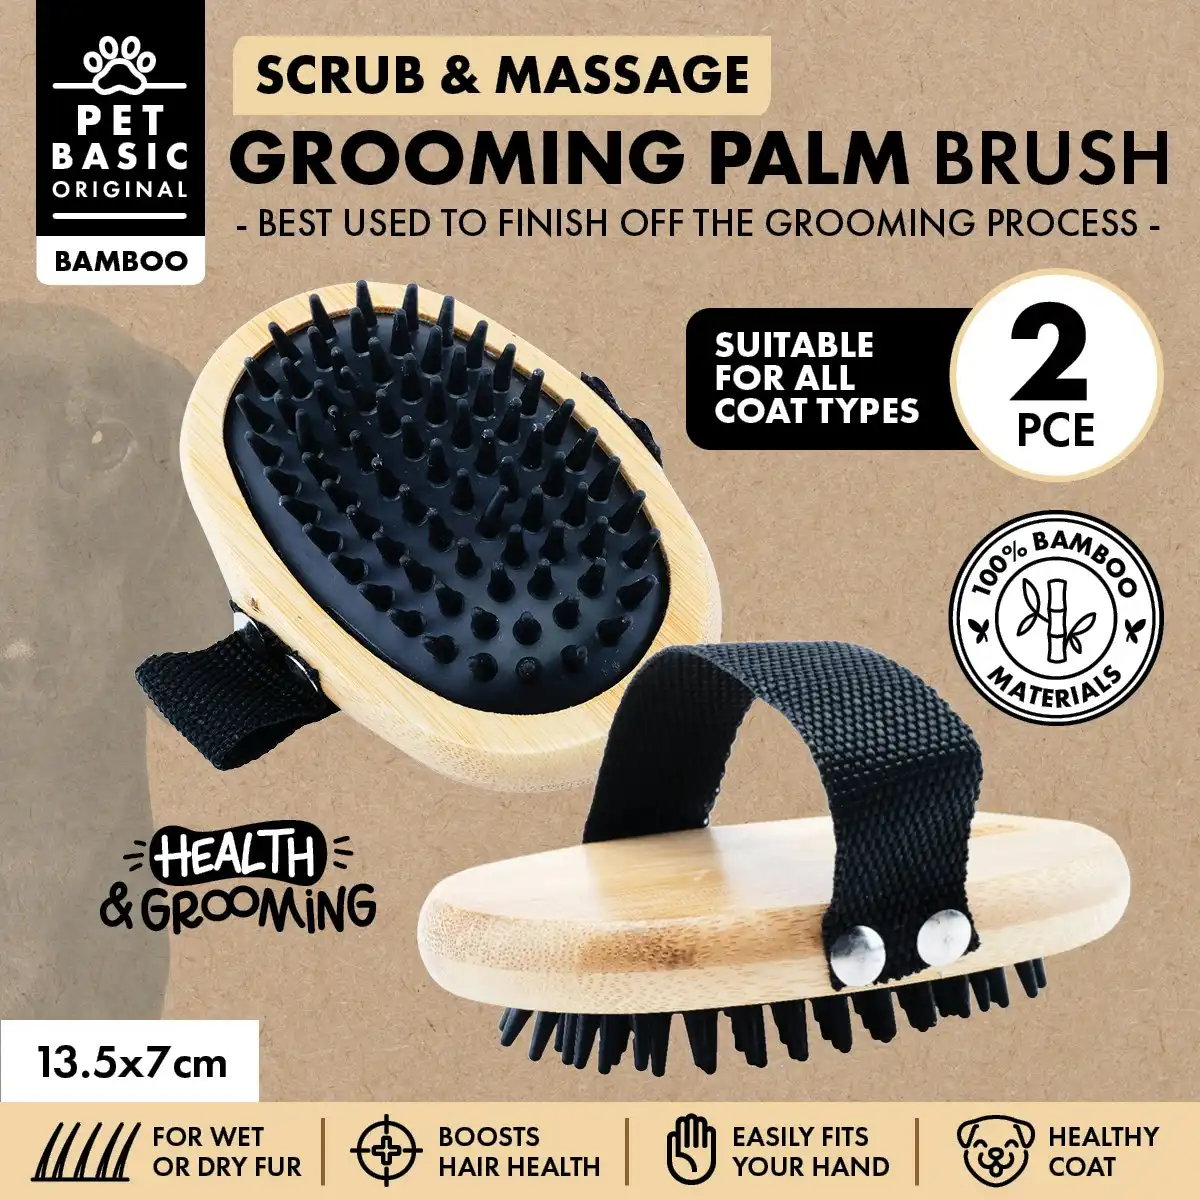 Pet Basic 2PCE Massage Grooming Palm Brush Soothing & Gentle Wet/Dry 13.5cm